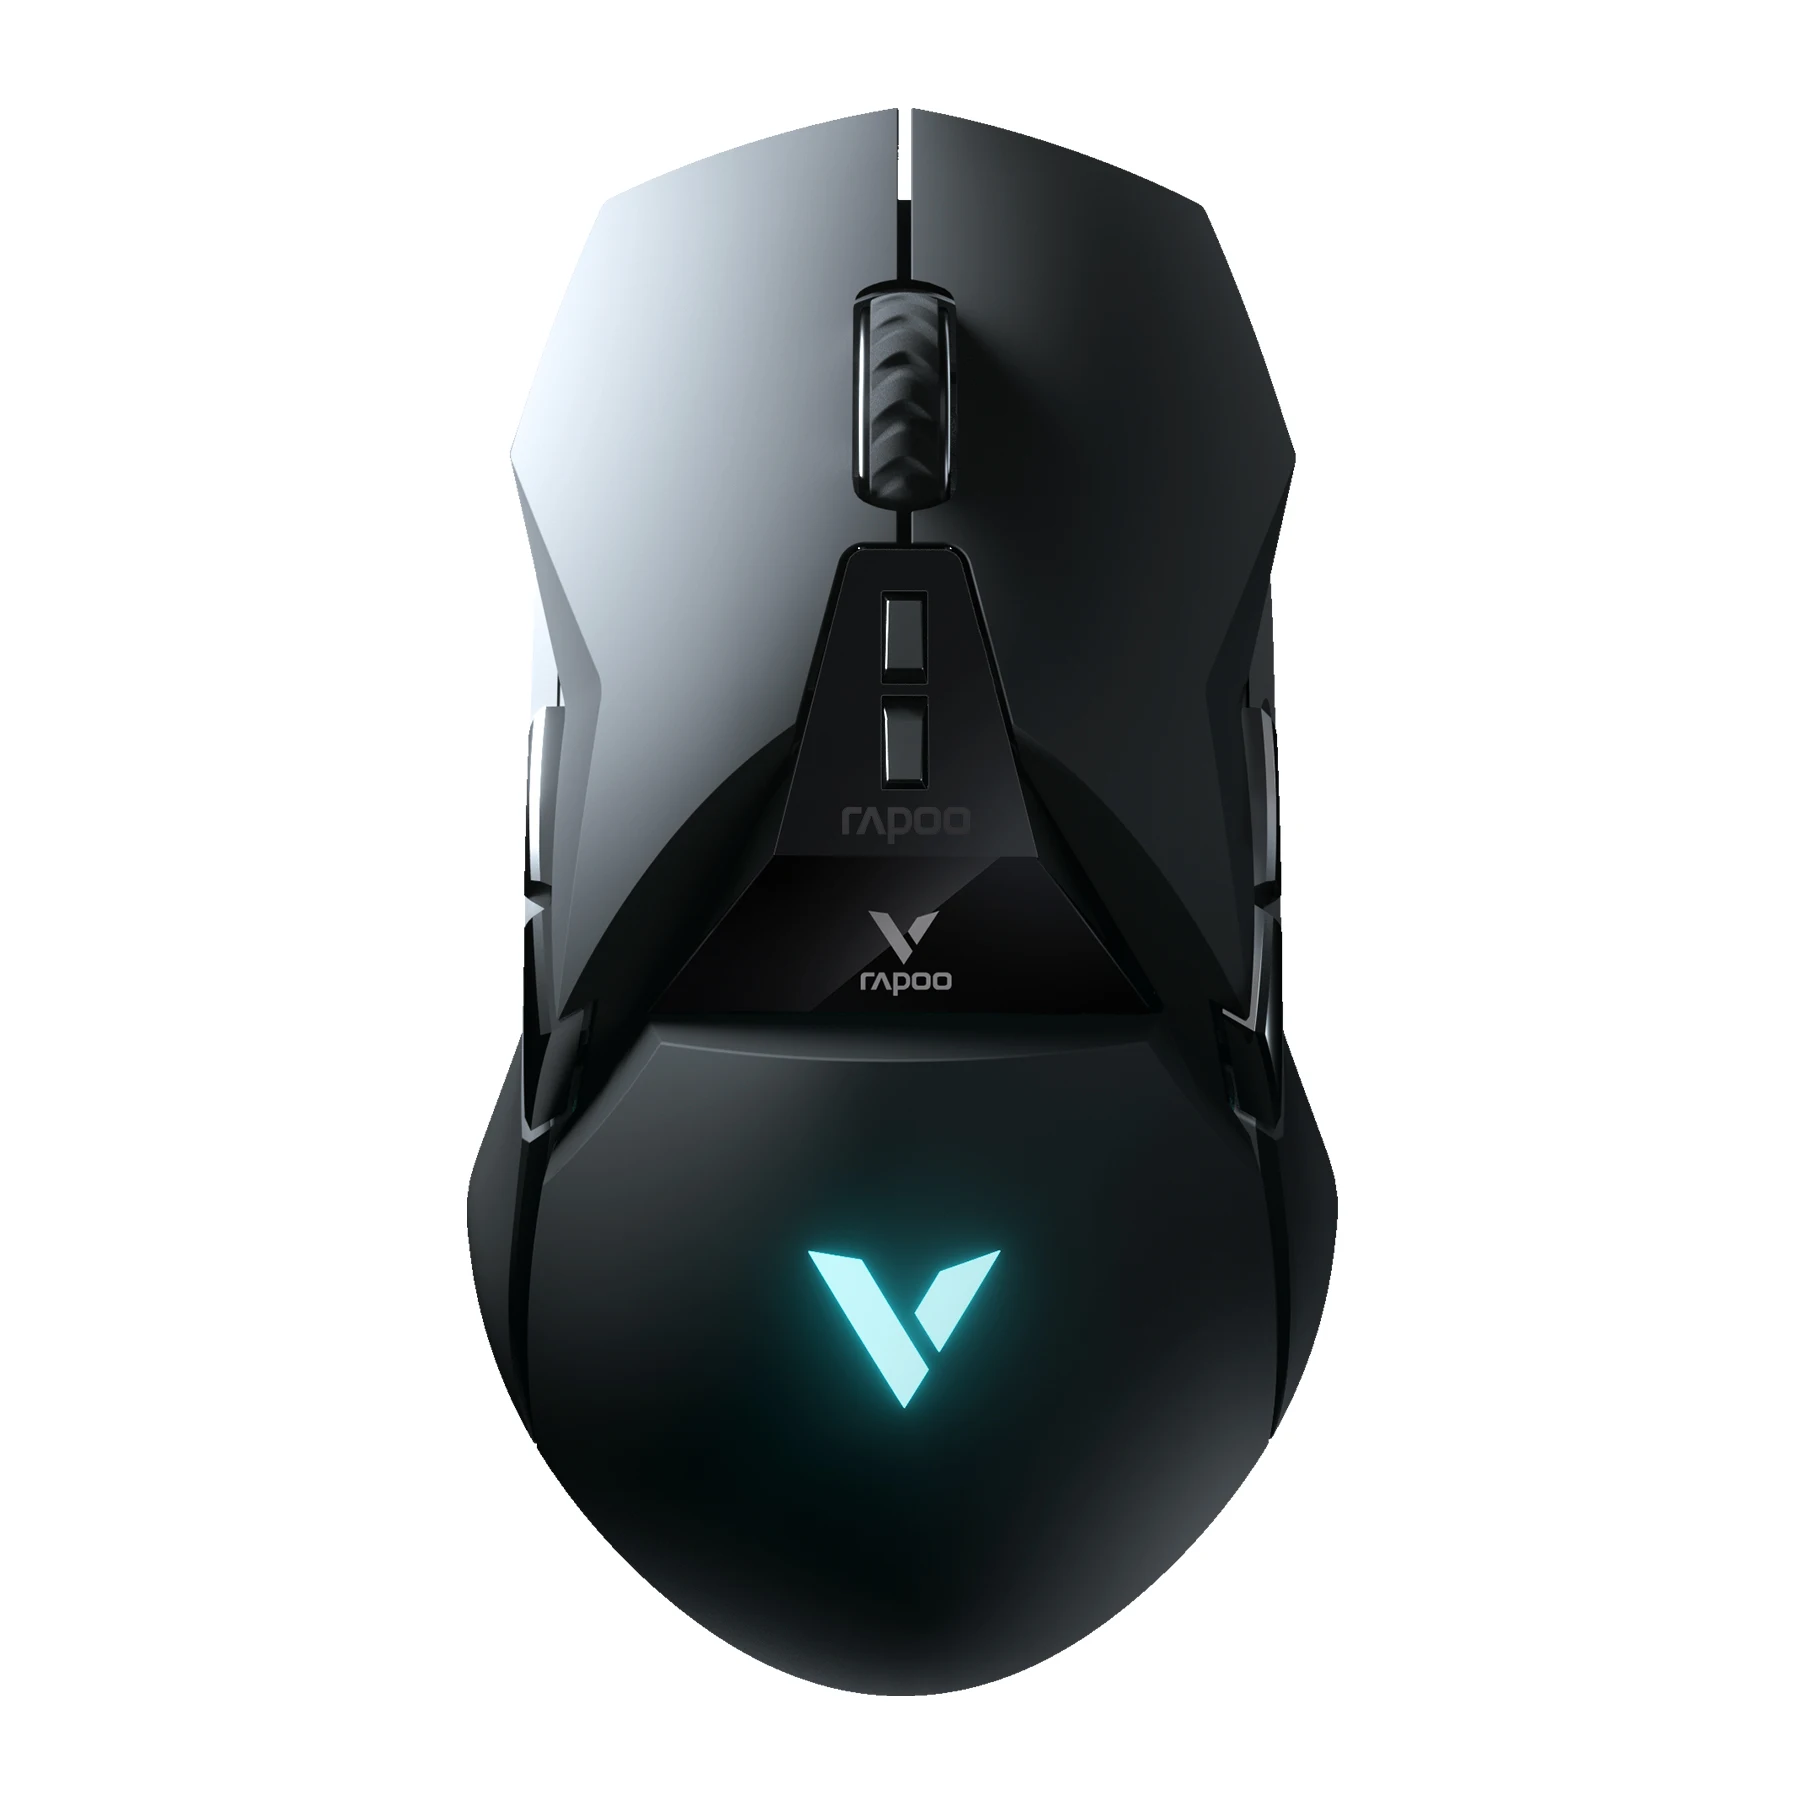 

RAPOO VT950 Wired/Wireless Gaming Mouse 10000 DPI 11 Buttons Programmable RGB BackLight Rechargeable Ergonomic Mouse Gamer Mouse